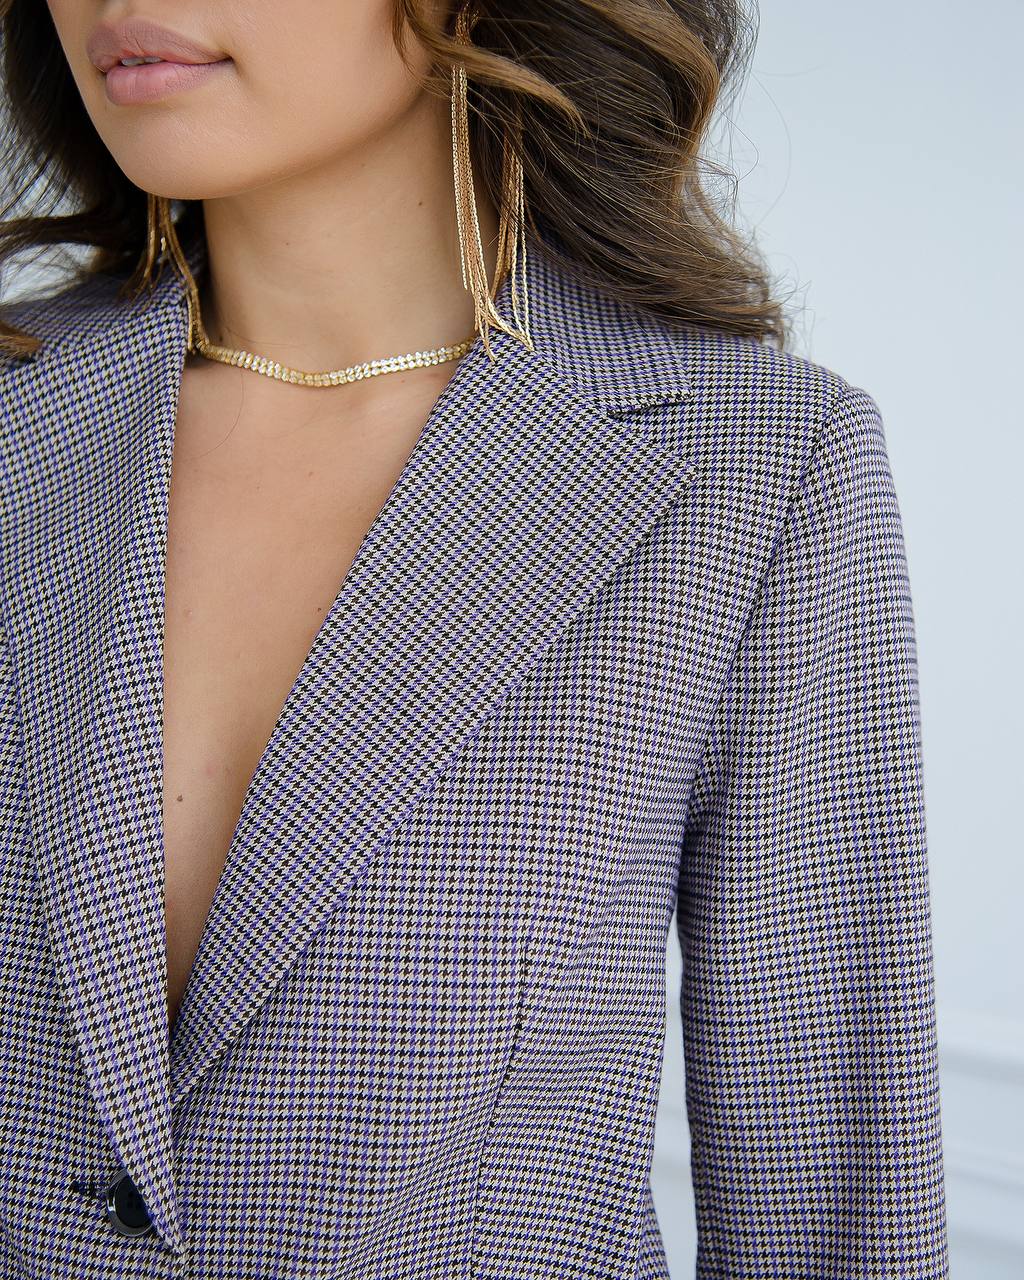 a close up of a person wearing a suit